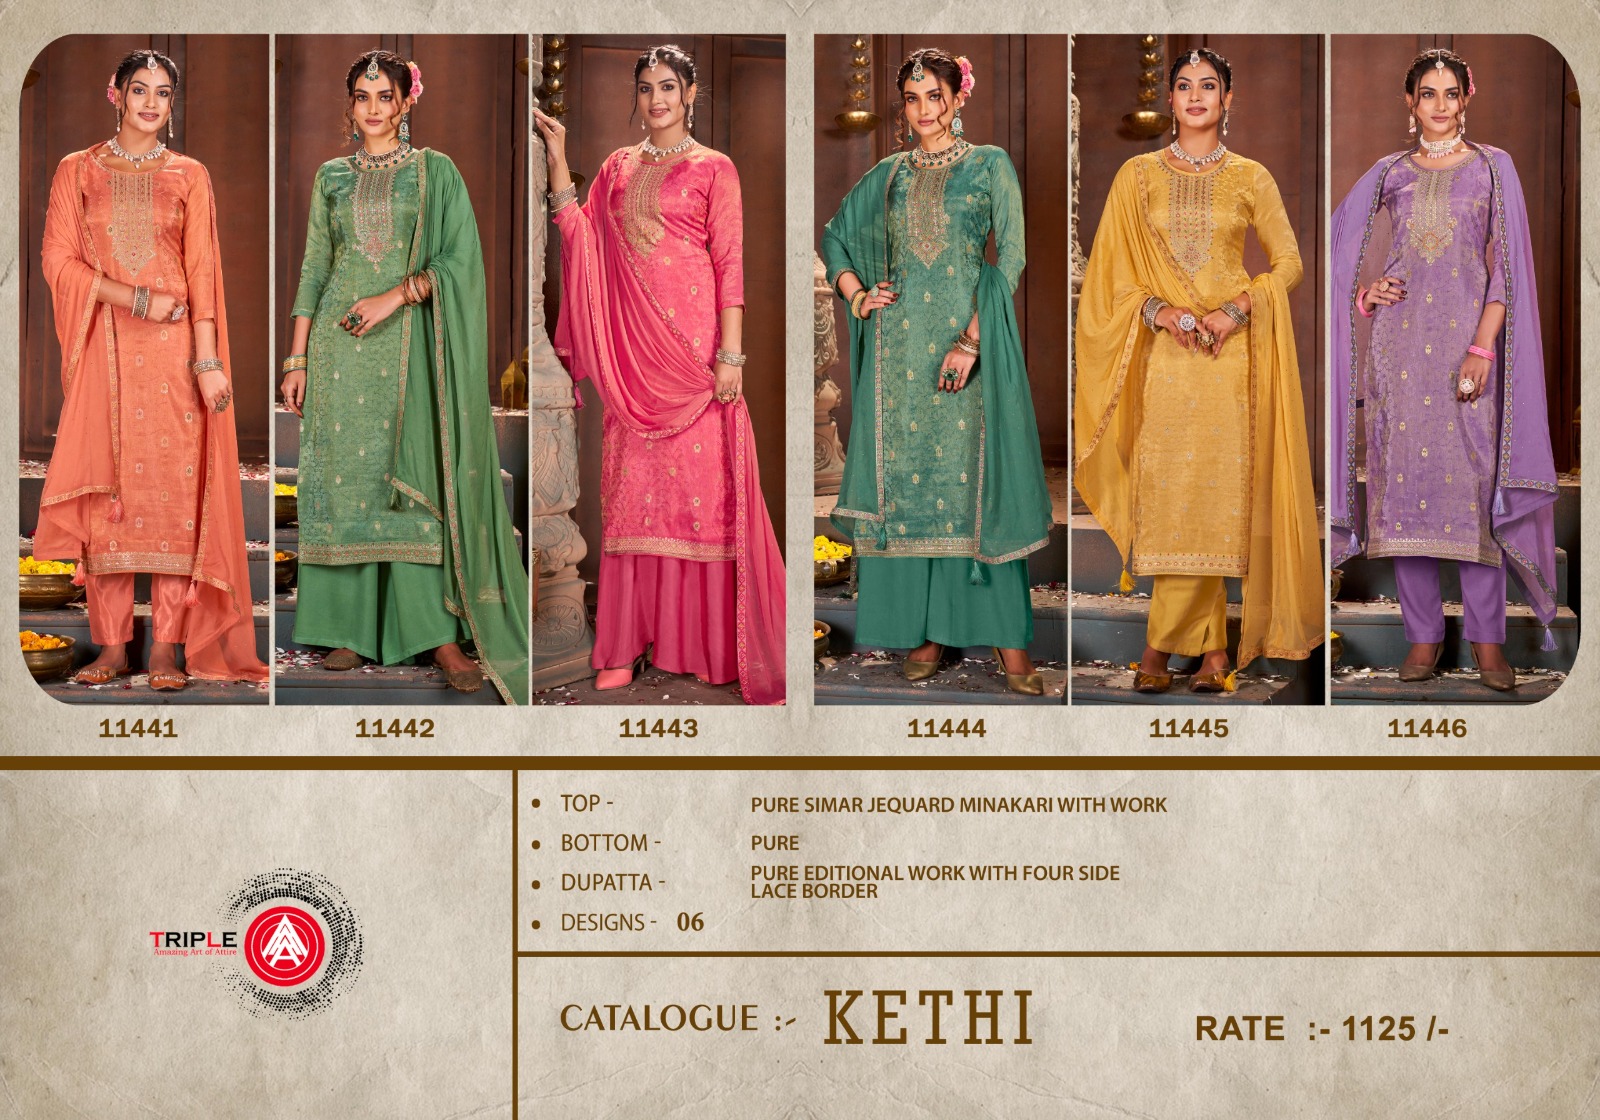 Triple A Kethi collection 1